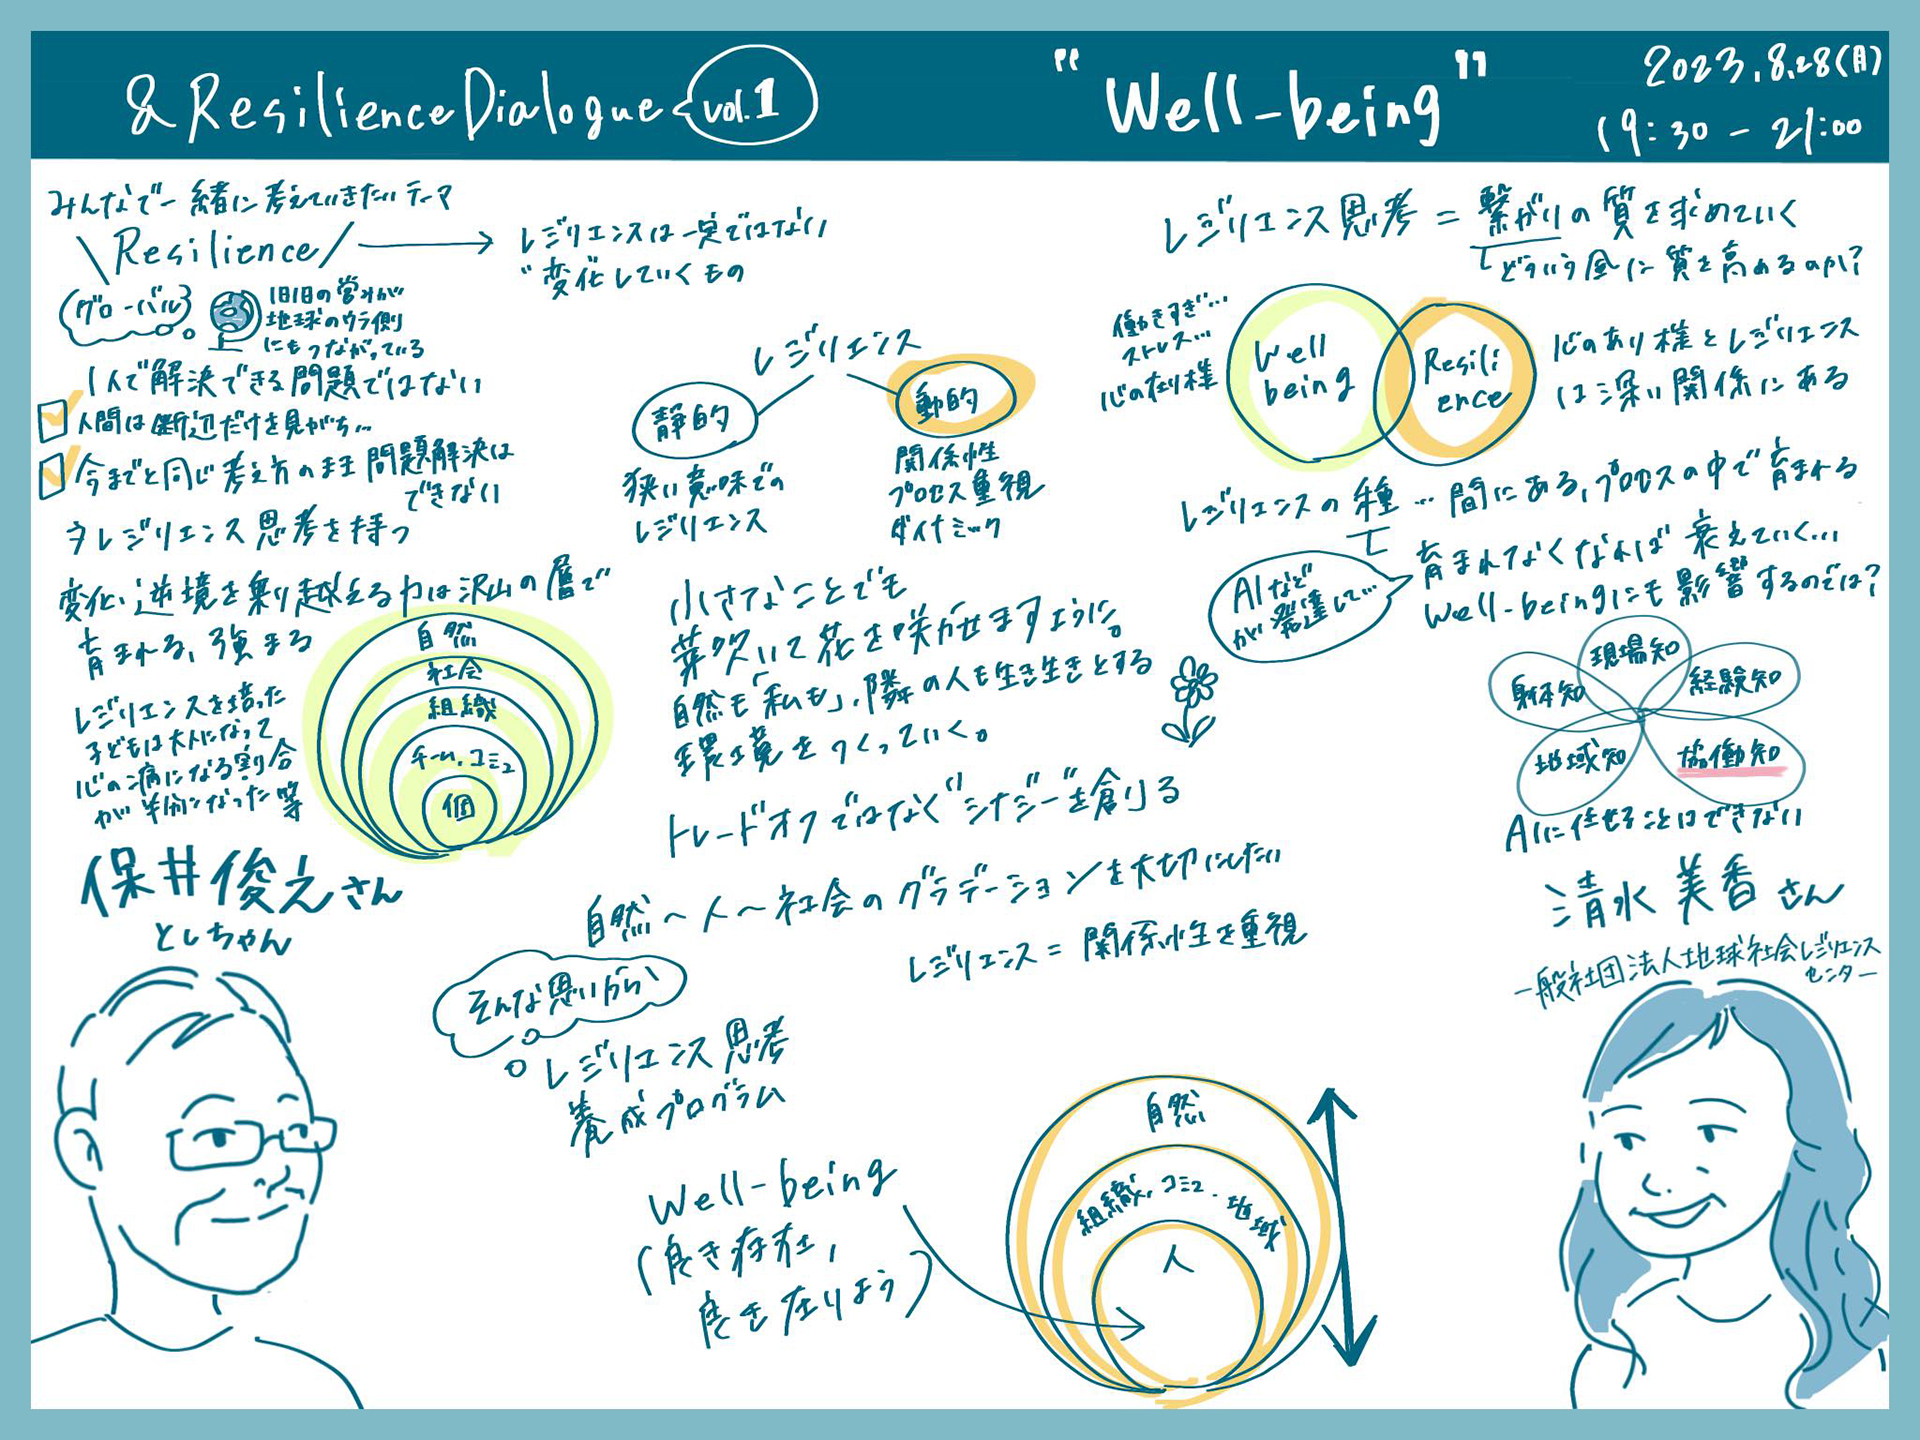 & Resilience Dialogue Vol.01 "Well-being"